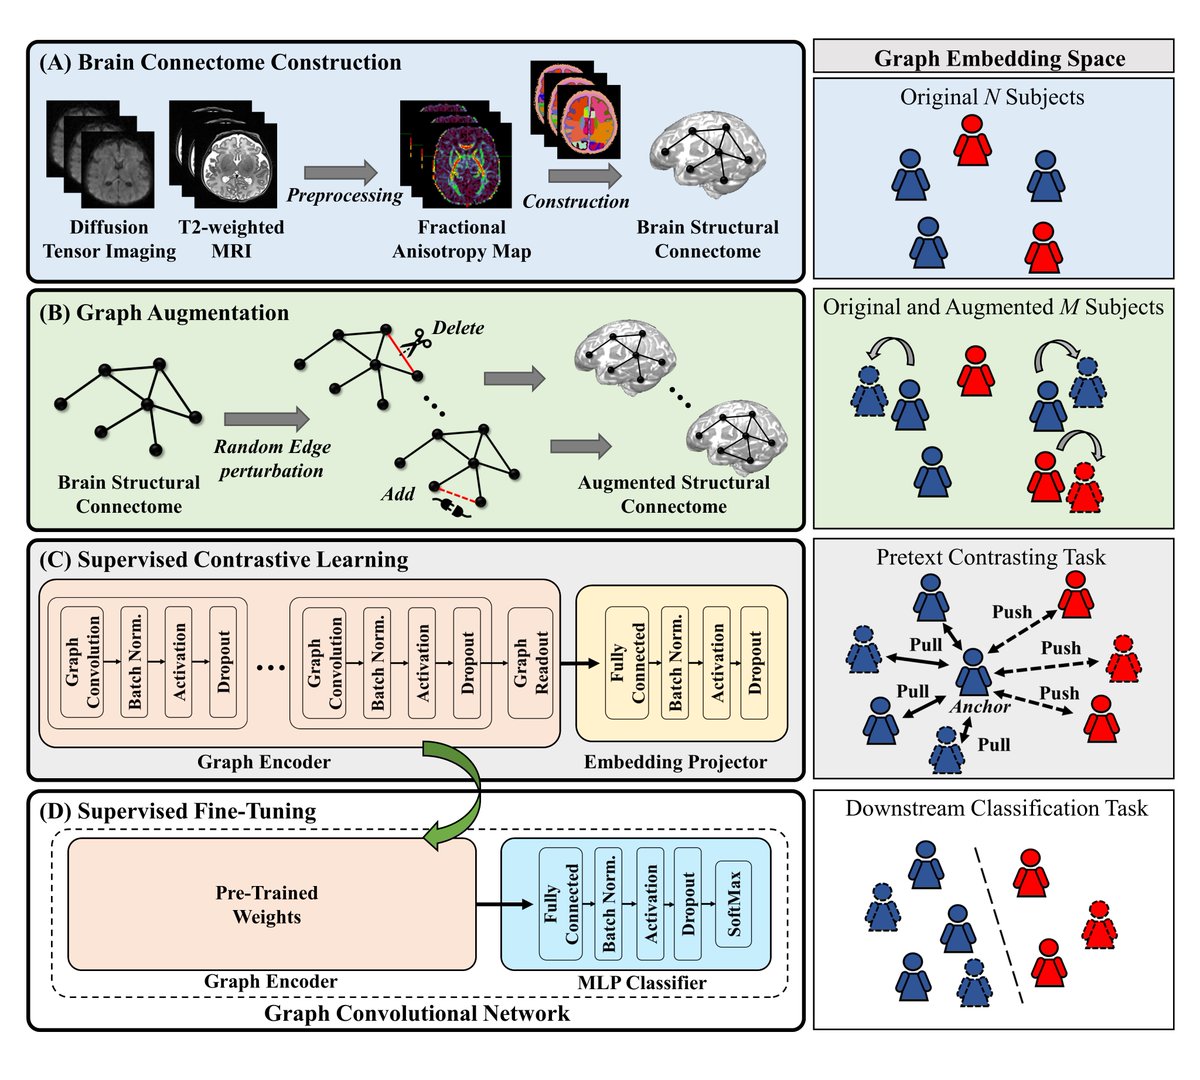 Our new AI model for the neonatal brain is published at NeuroImage- [Supervised contrastive learning enhances graph convolutional networks...]  sciencedirect.com/science/articl… 
This is truly teamwork!!
@DrNehalParikh @therealjonadill @Zhiyuanliz27 @AI_CAD_CCHMC @CincyKidsRad